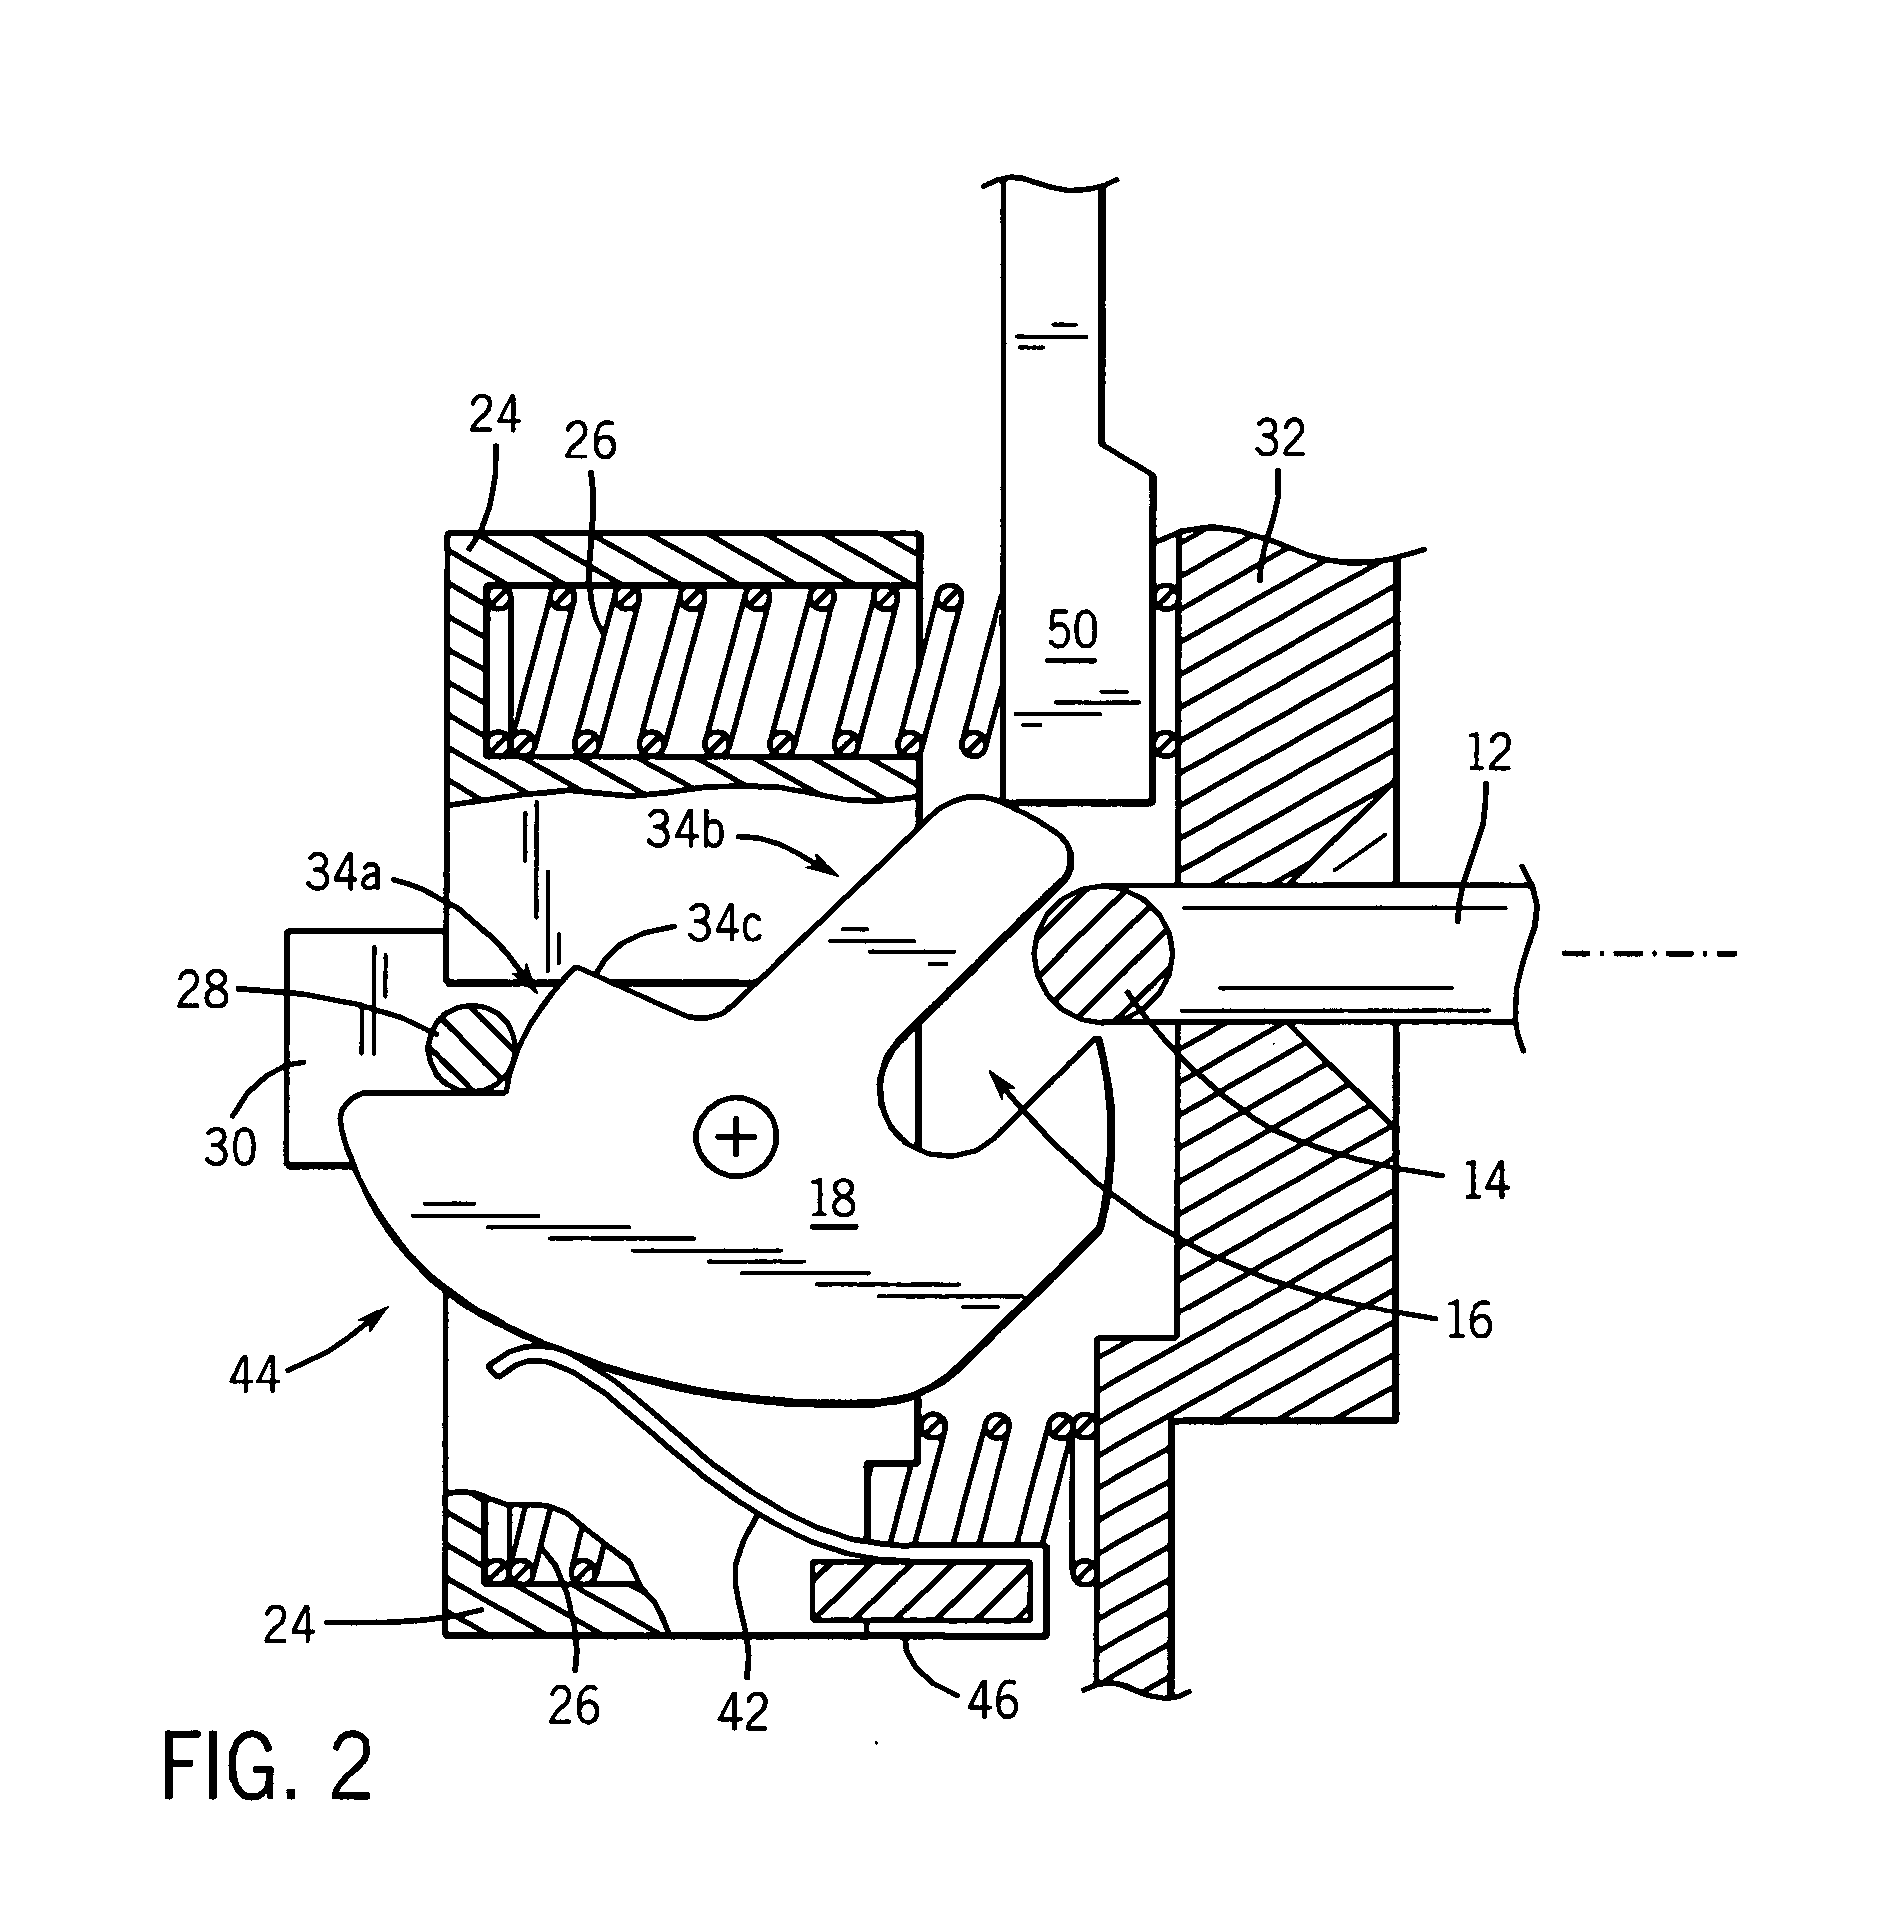 Appliance latch having a rotating latch hook mounted on a linear slide